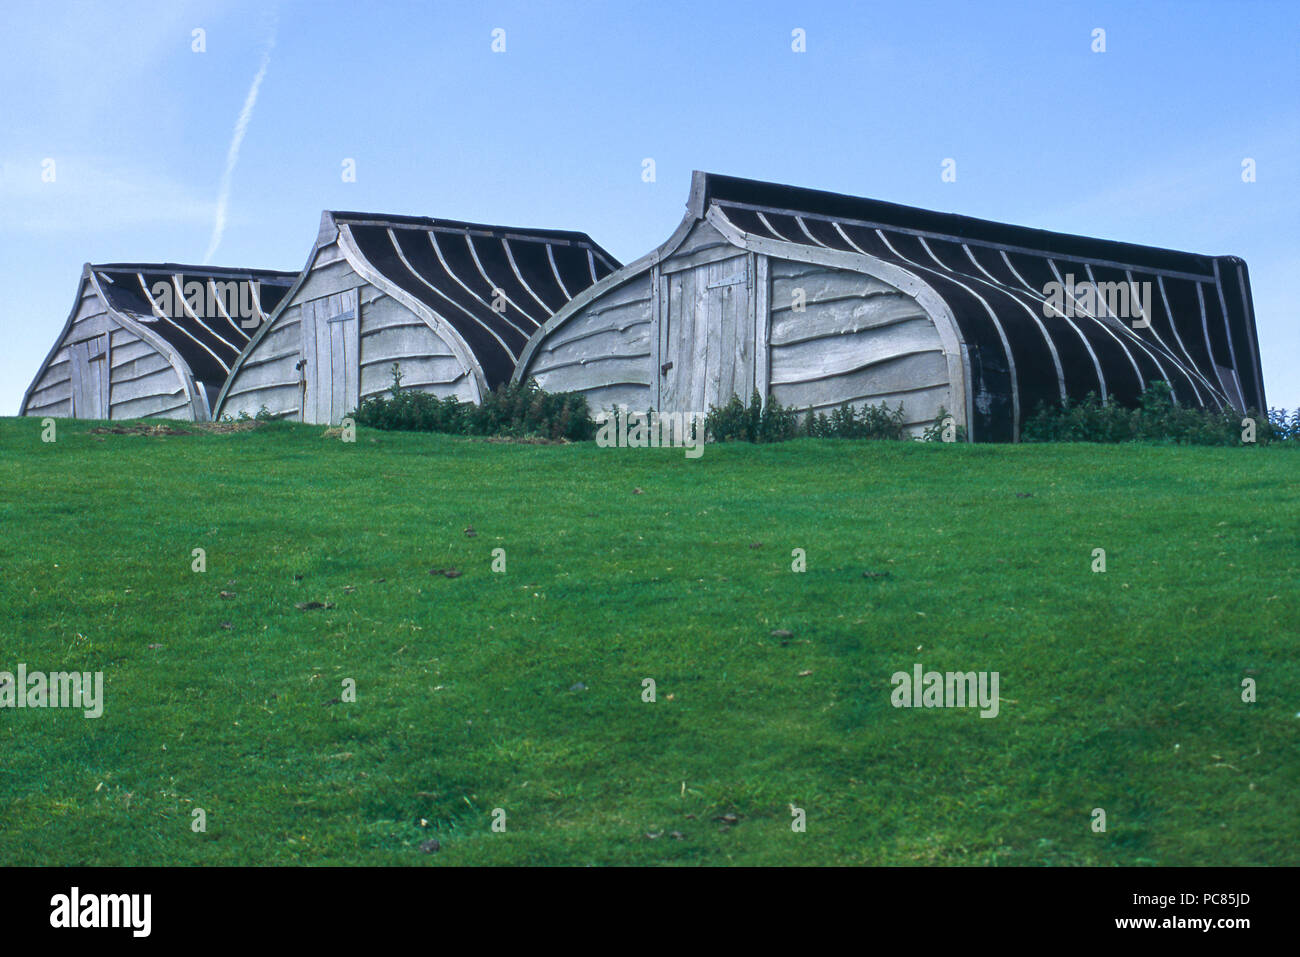 Boat-hull sheds on Lindisfarne (Holy Island) on the North Sea coast of England. Photograph Stock Photo